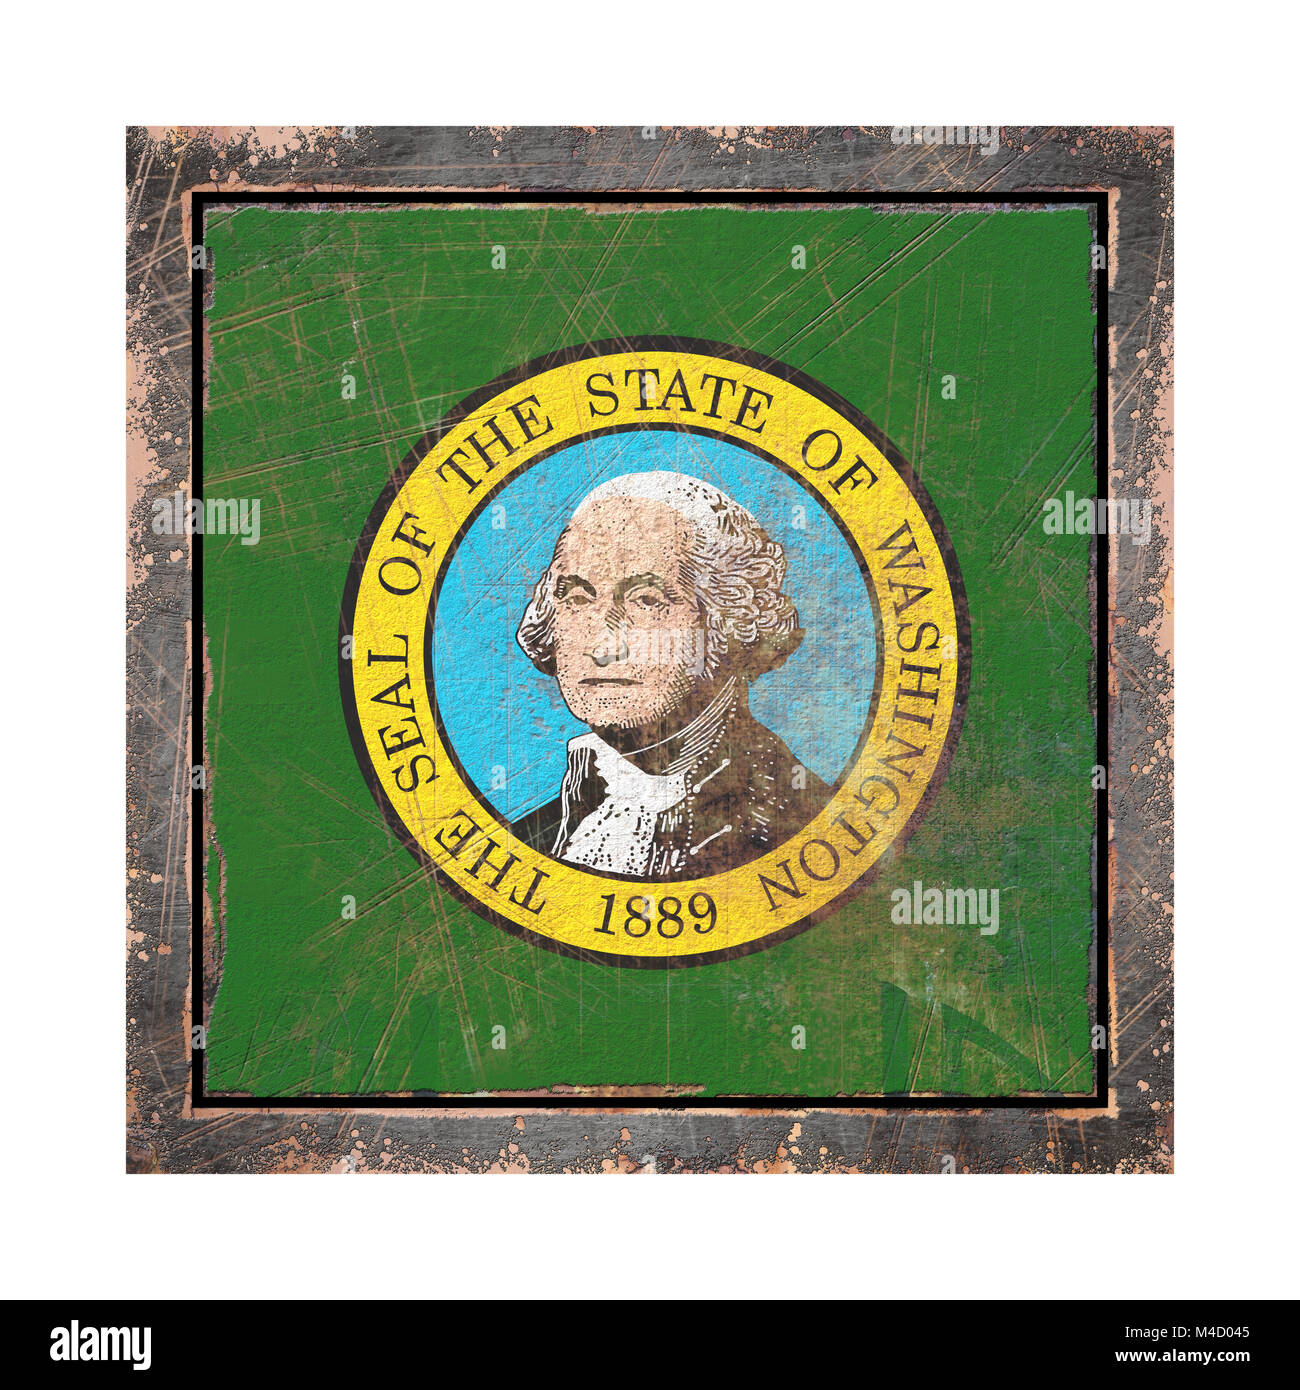 3d rendering of a Washington State flag over a rusty metallic plate wit a rusty frame. Isolated on white background. Stock Photo